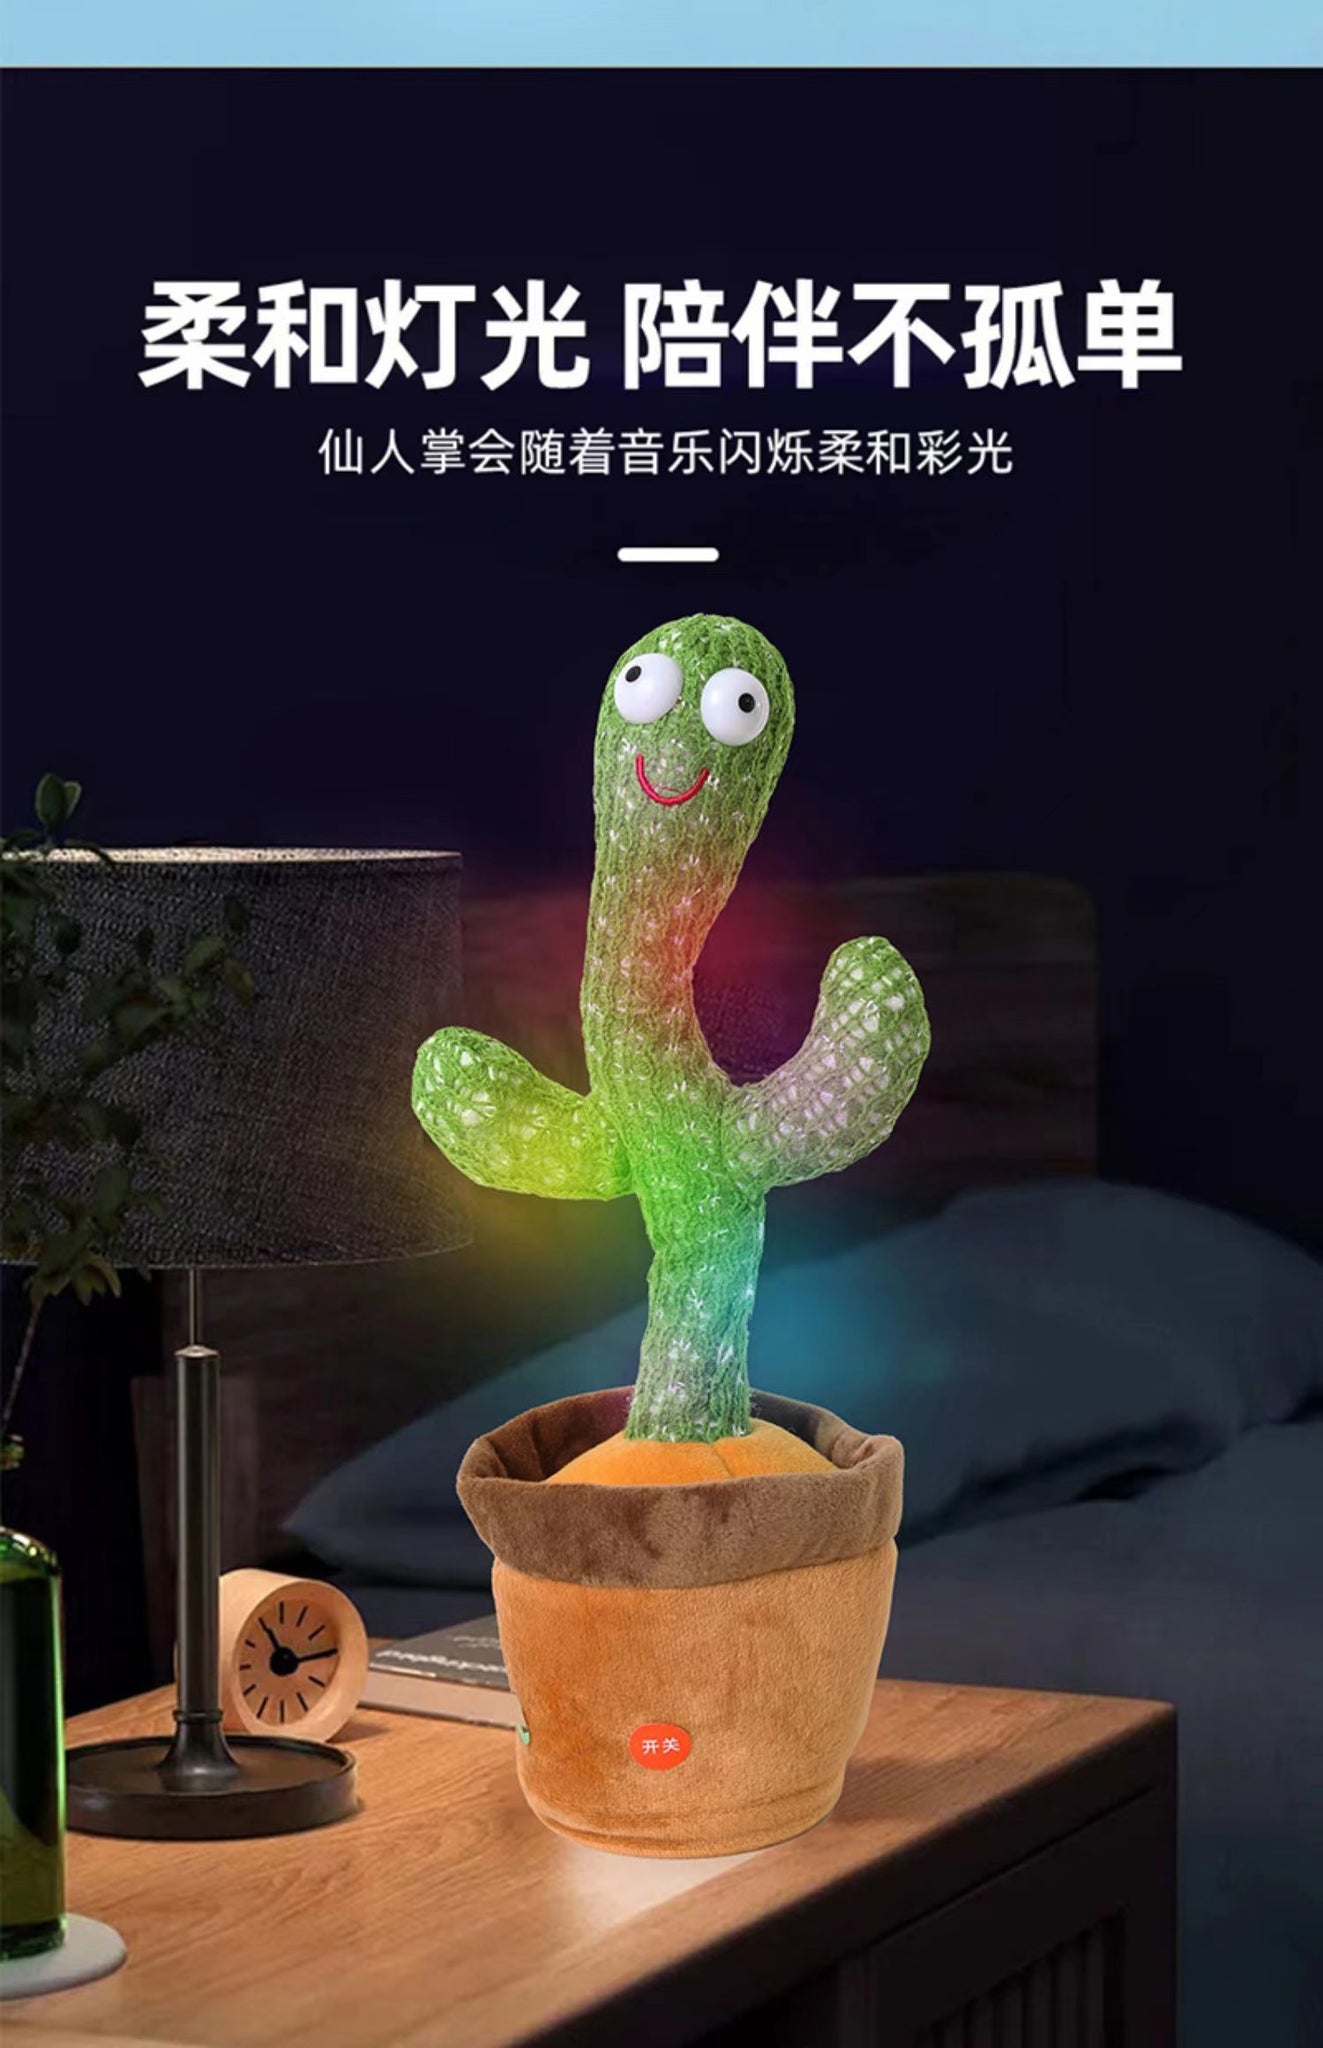 China Imported Dancing Cactus Repeater Cactus Funny Toy 抖音同款 会跳舞的仙人掌